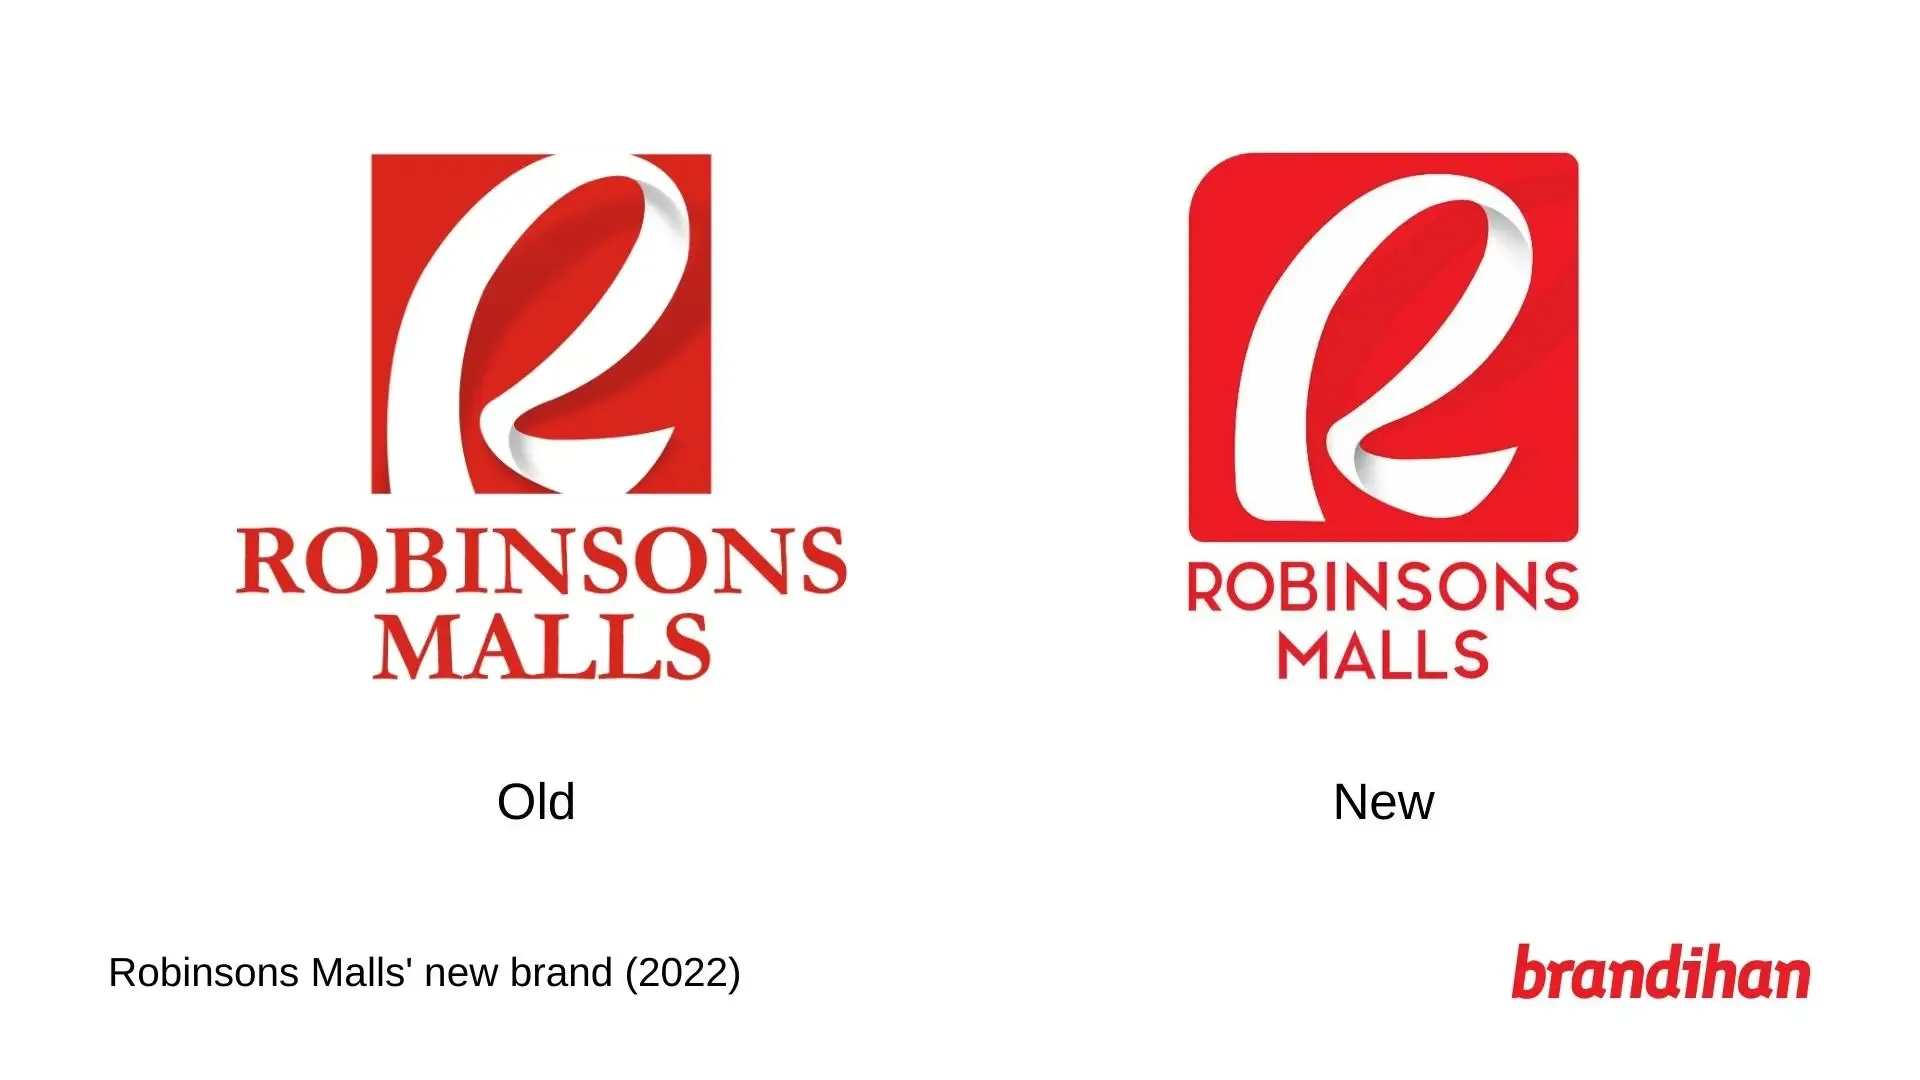 Robinsons Malls Brand Gets a Facelift